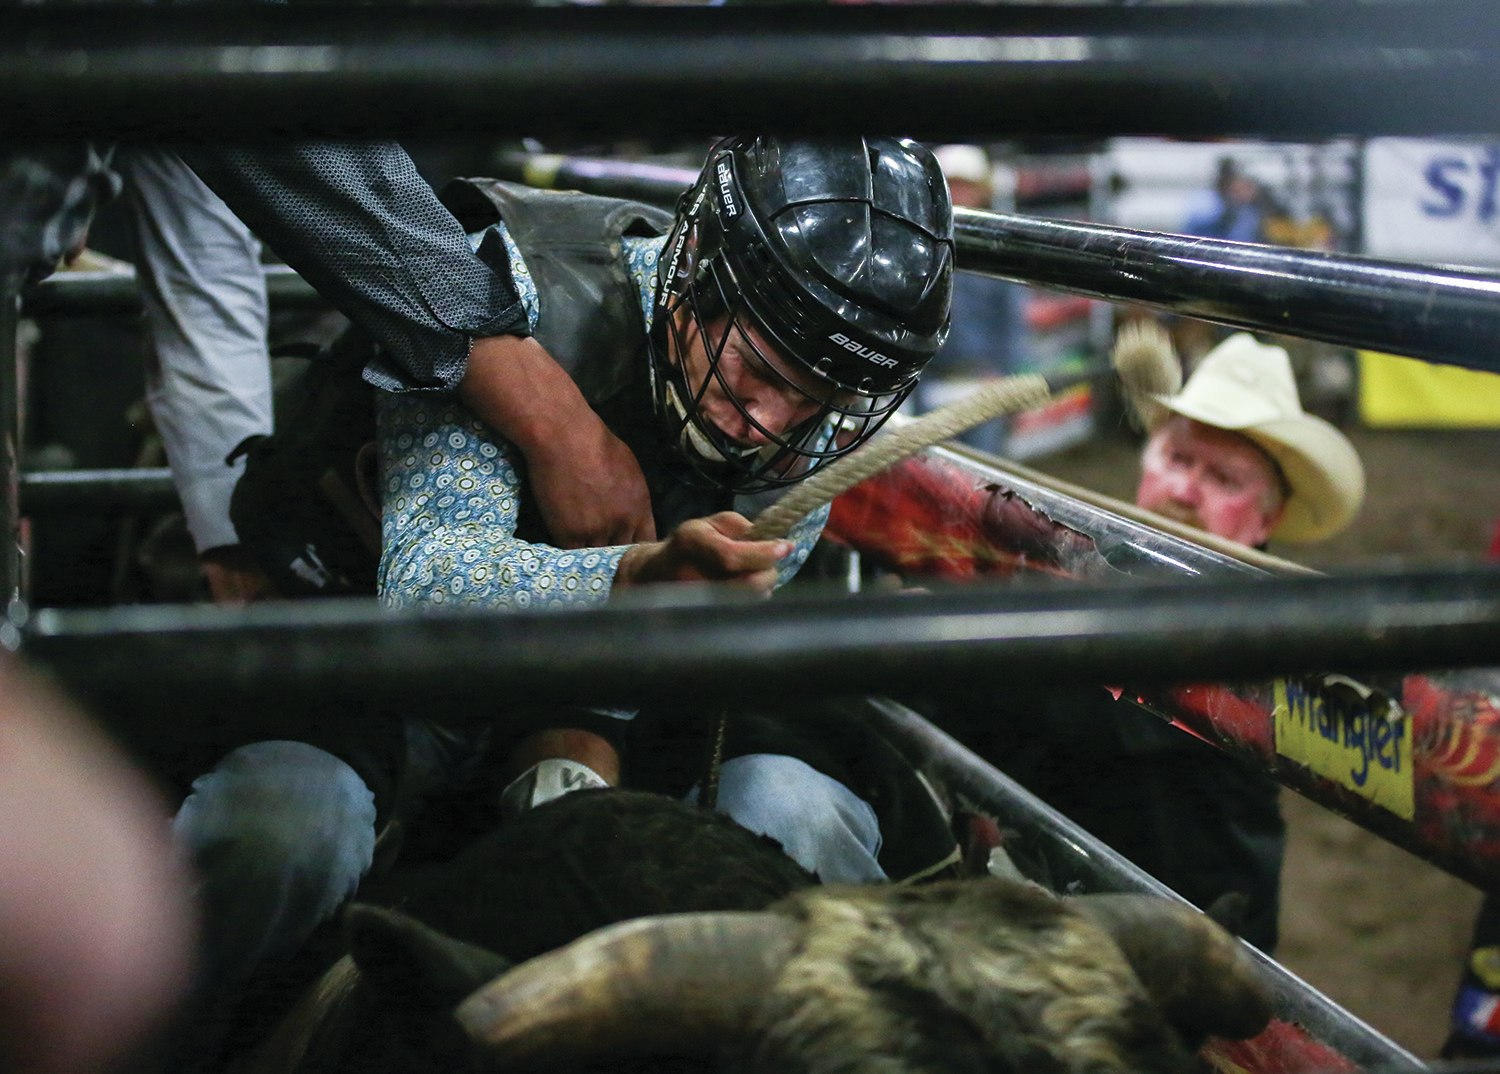 GETTING READY - Bull rider Wacey Finkbeiner prepared his rope before taking on a bull called Corona Time from Wayne Vold Rodeo during the Glencross Invitational Charity Roughstock Event at Westerner Park last weekend.